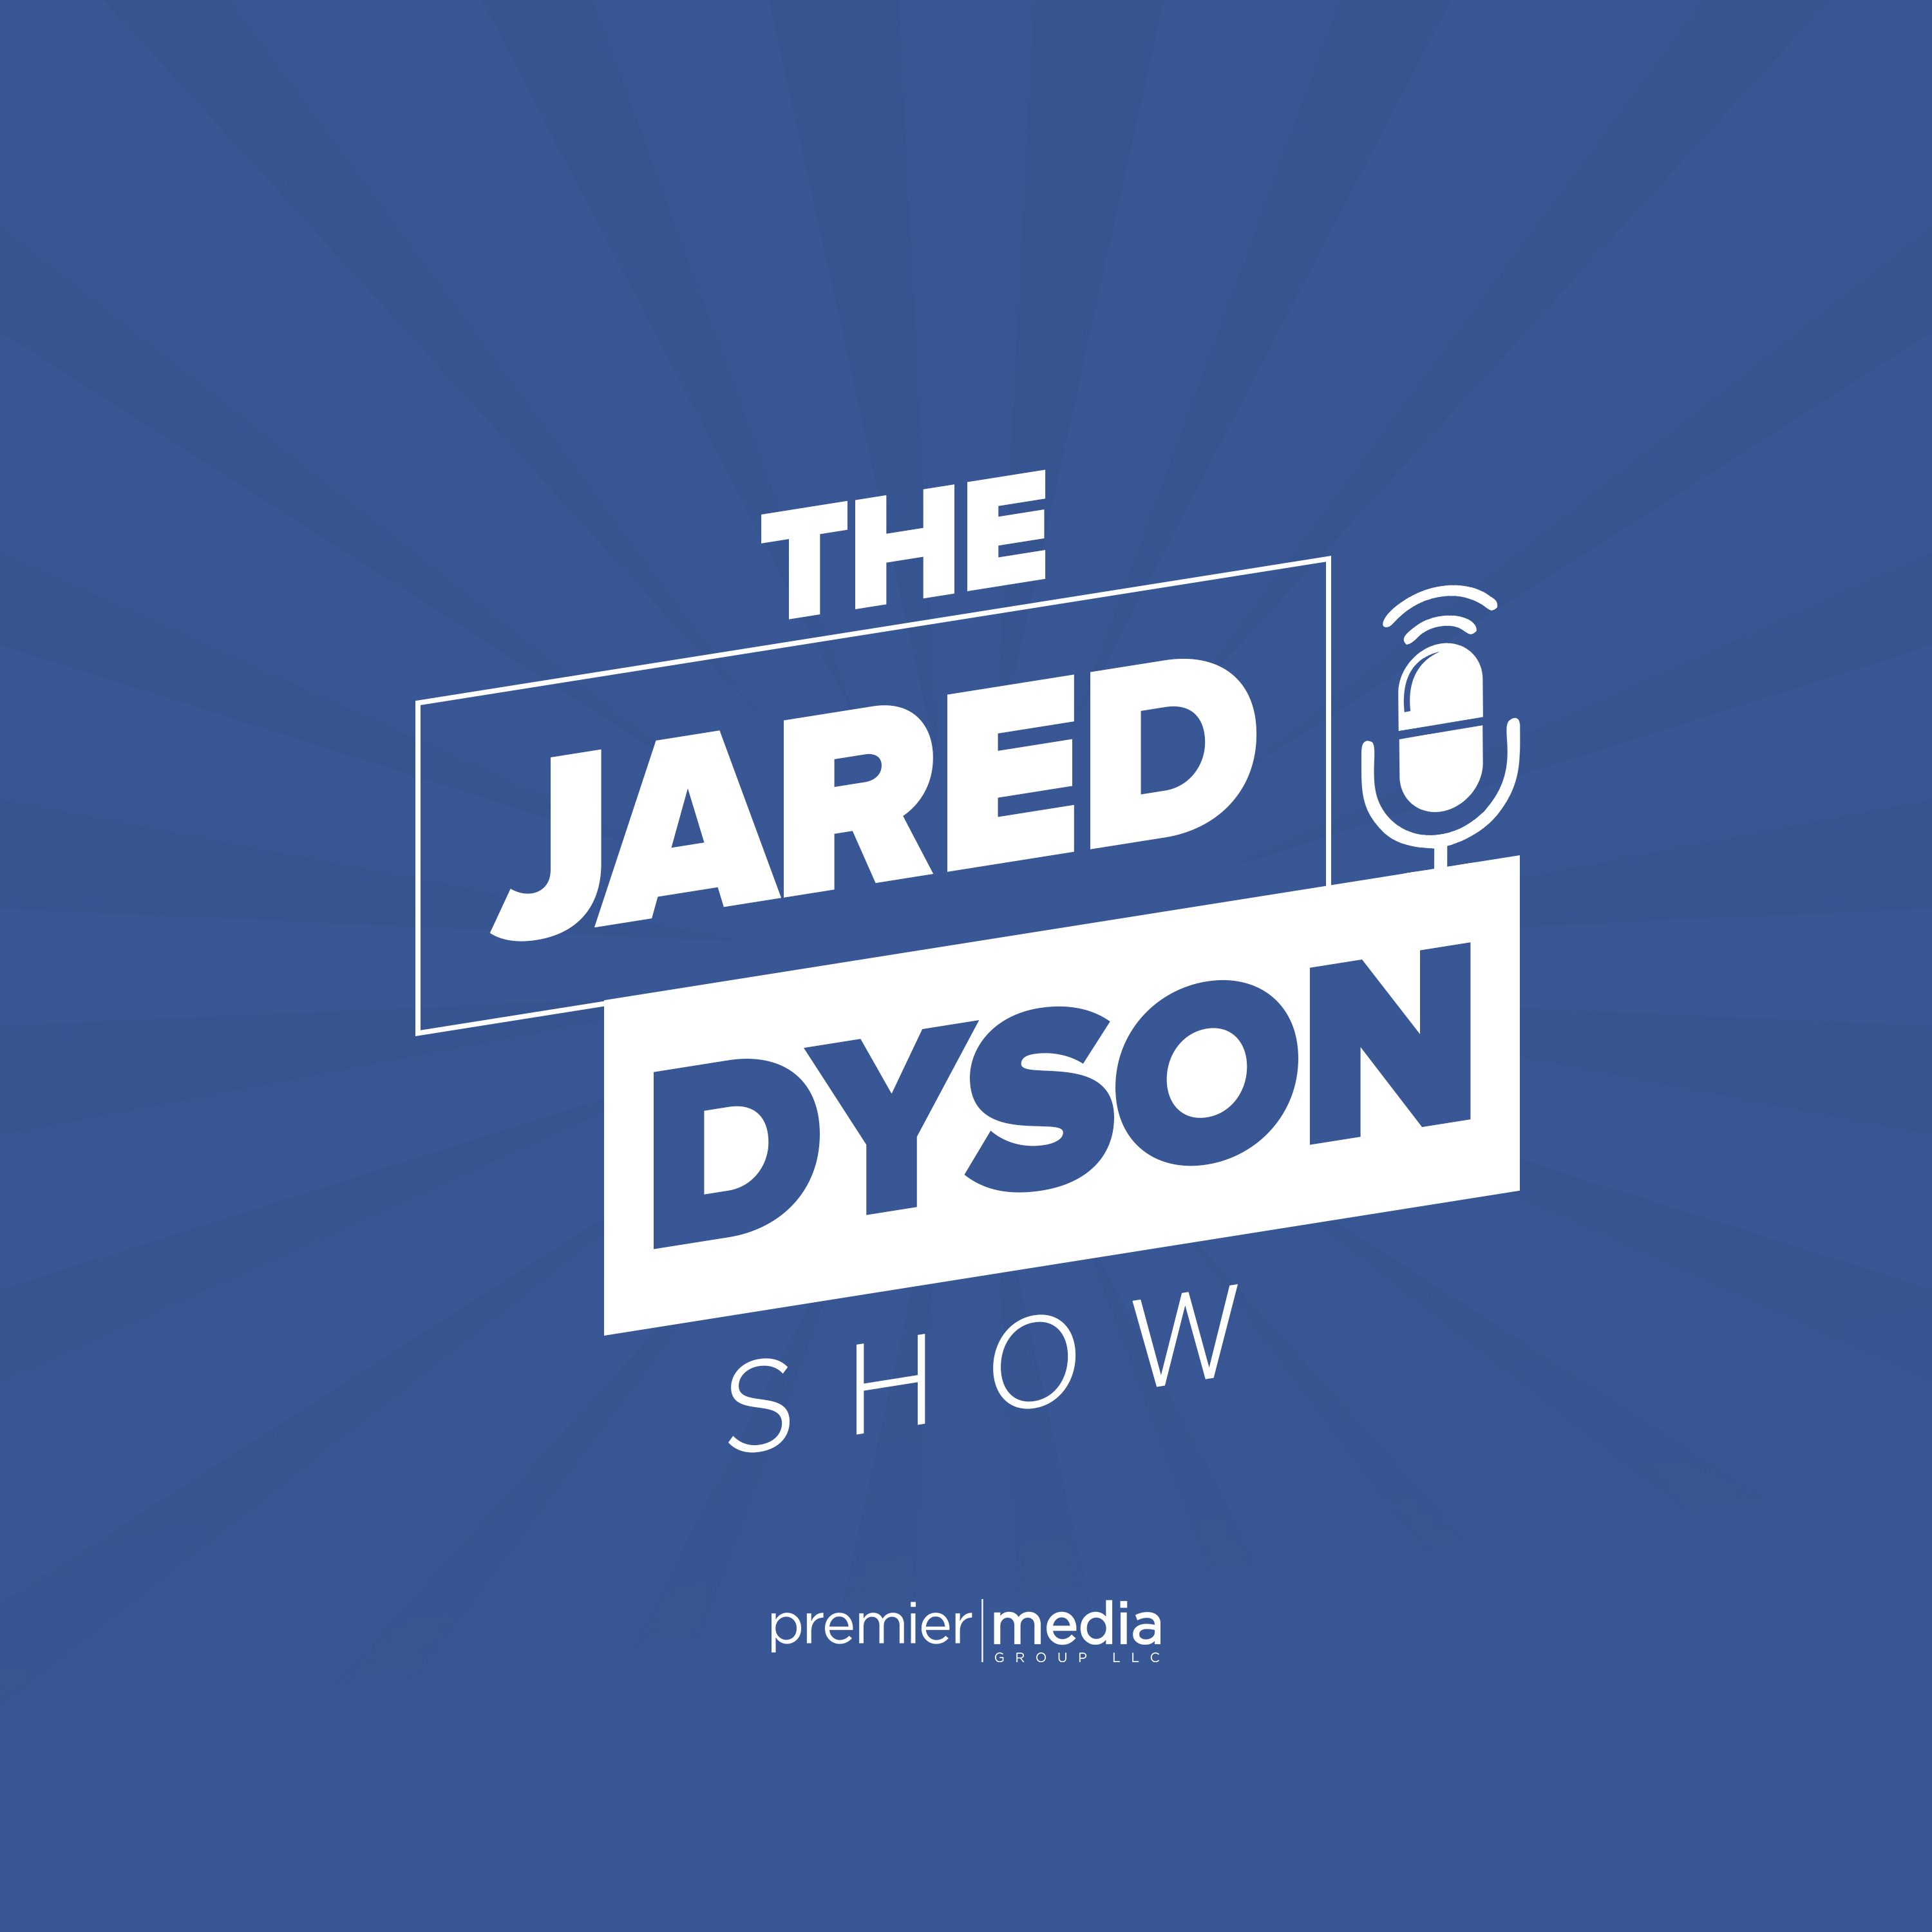 The Jared Dyson Show